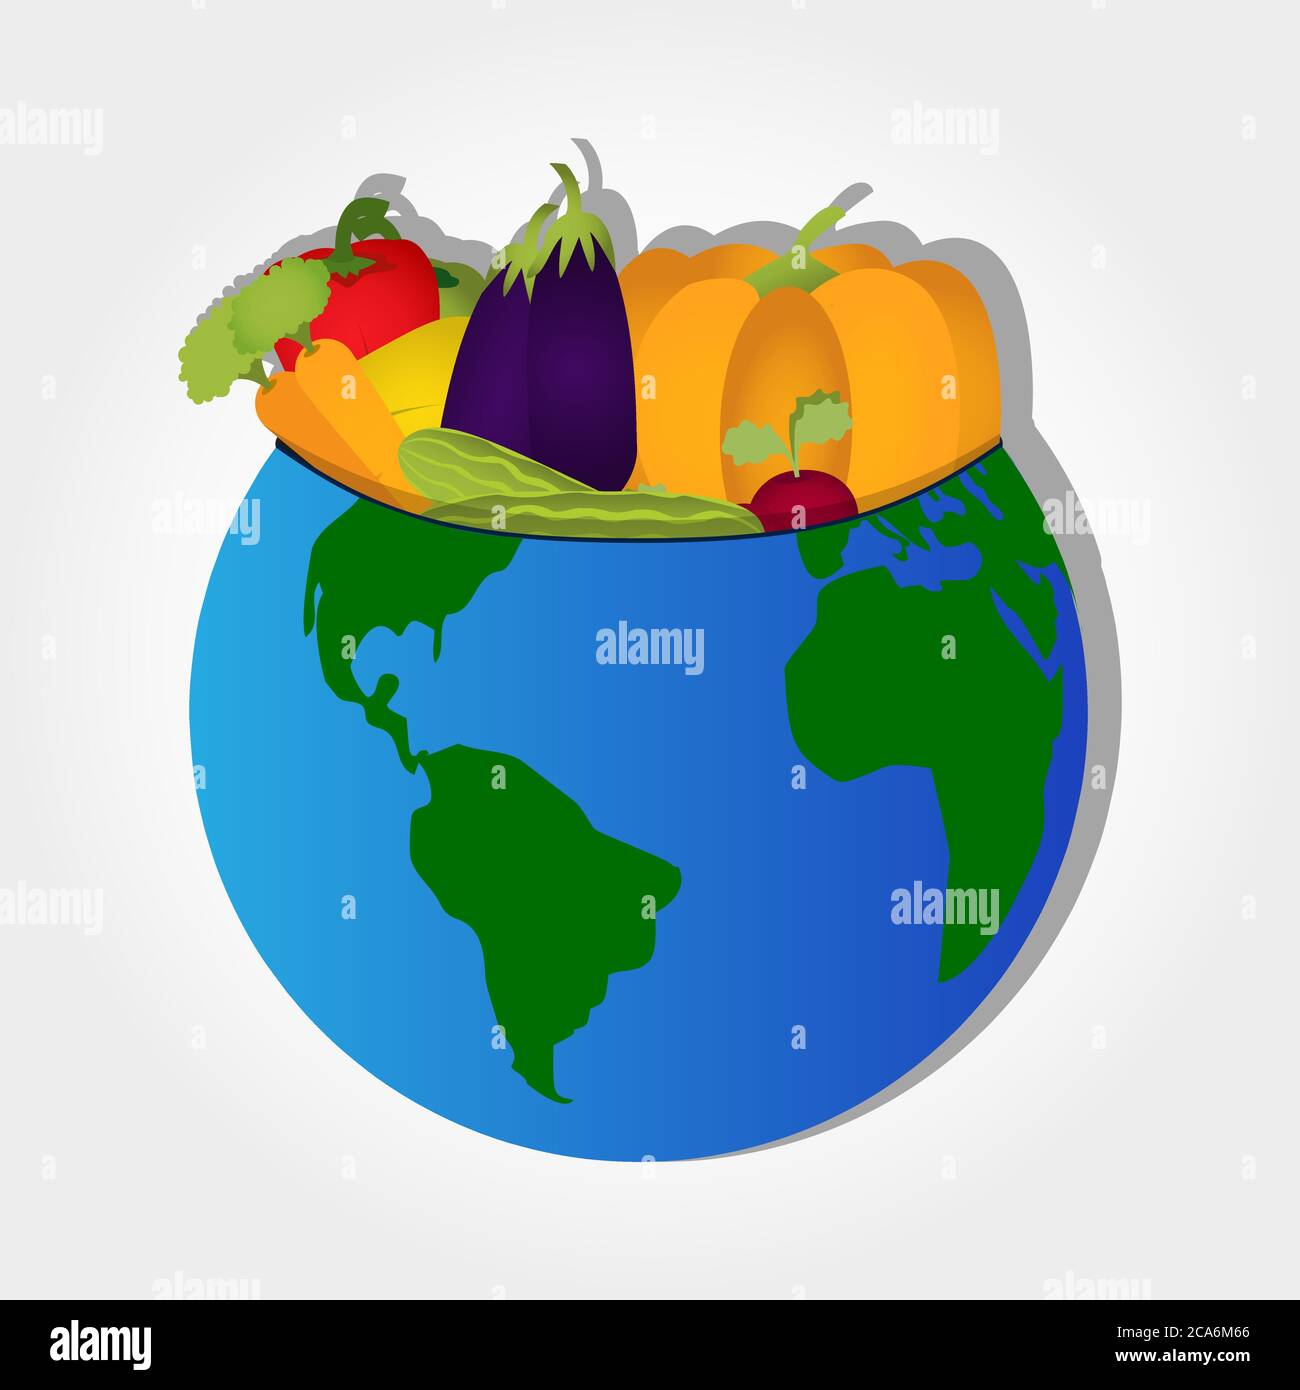 Vegetables on the planet like a bowl. Stock Vector